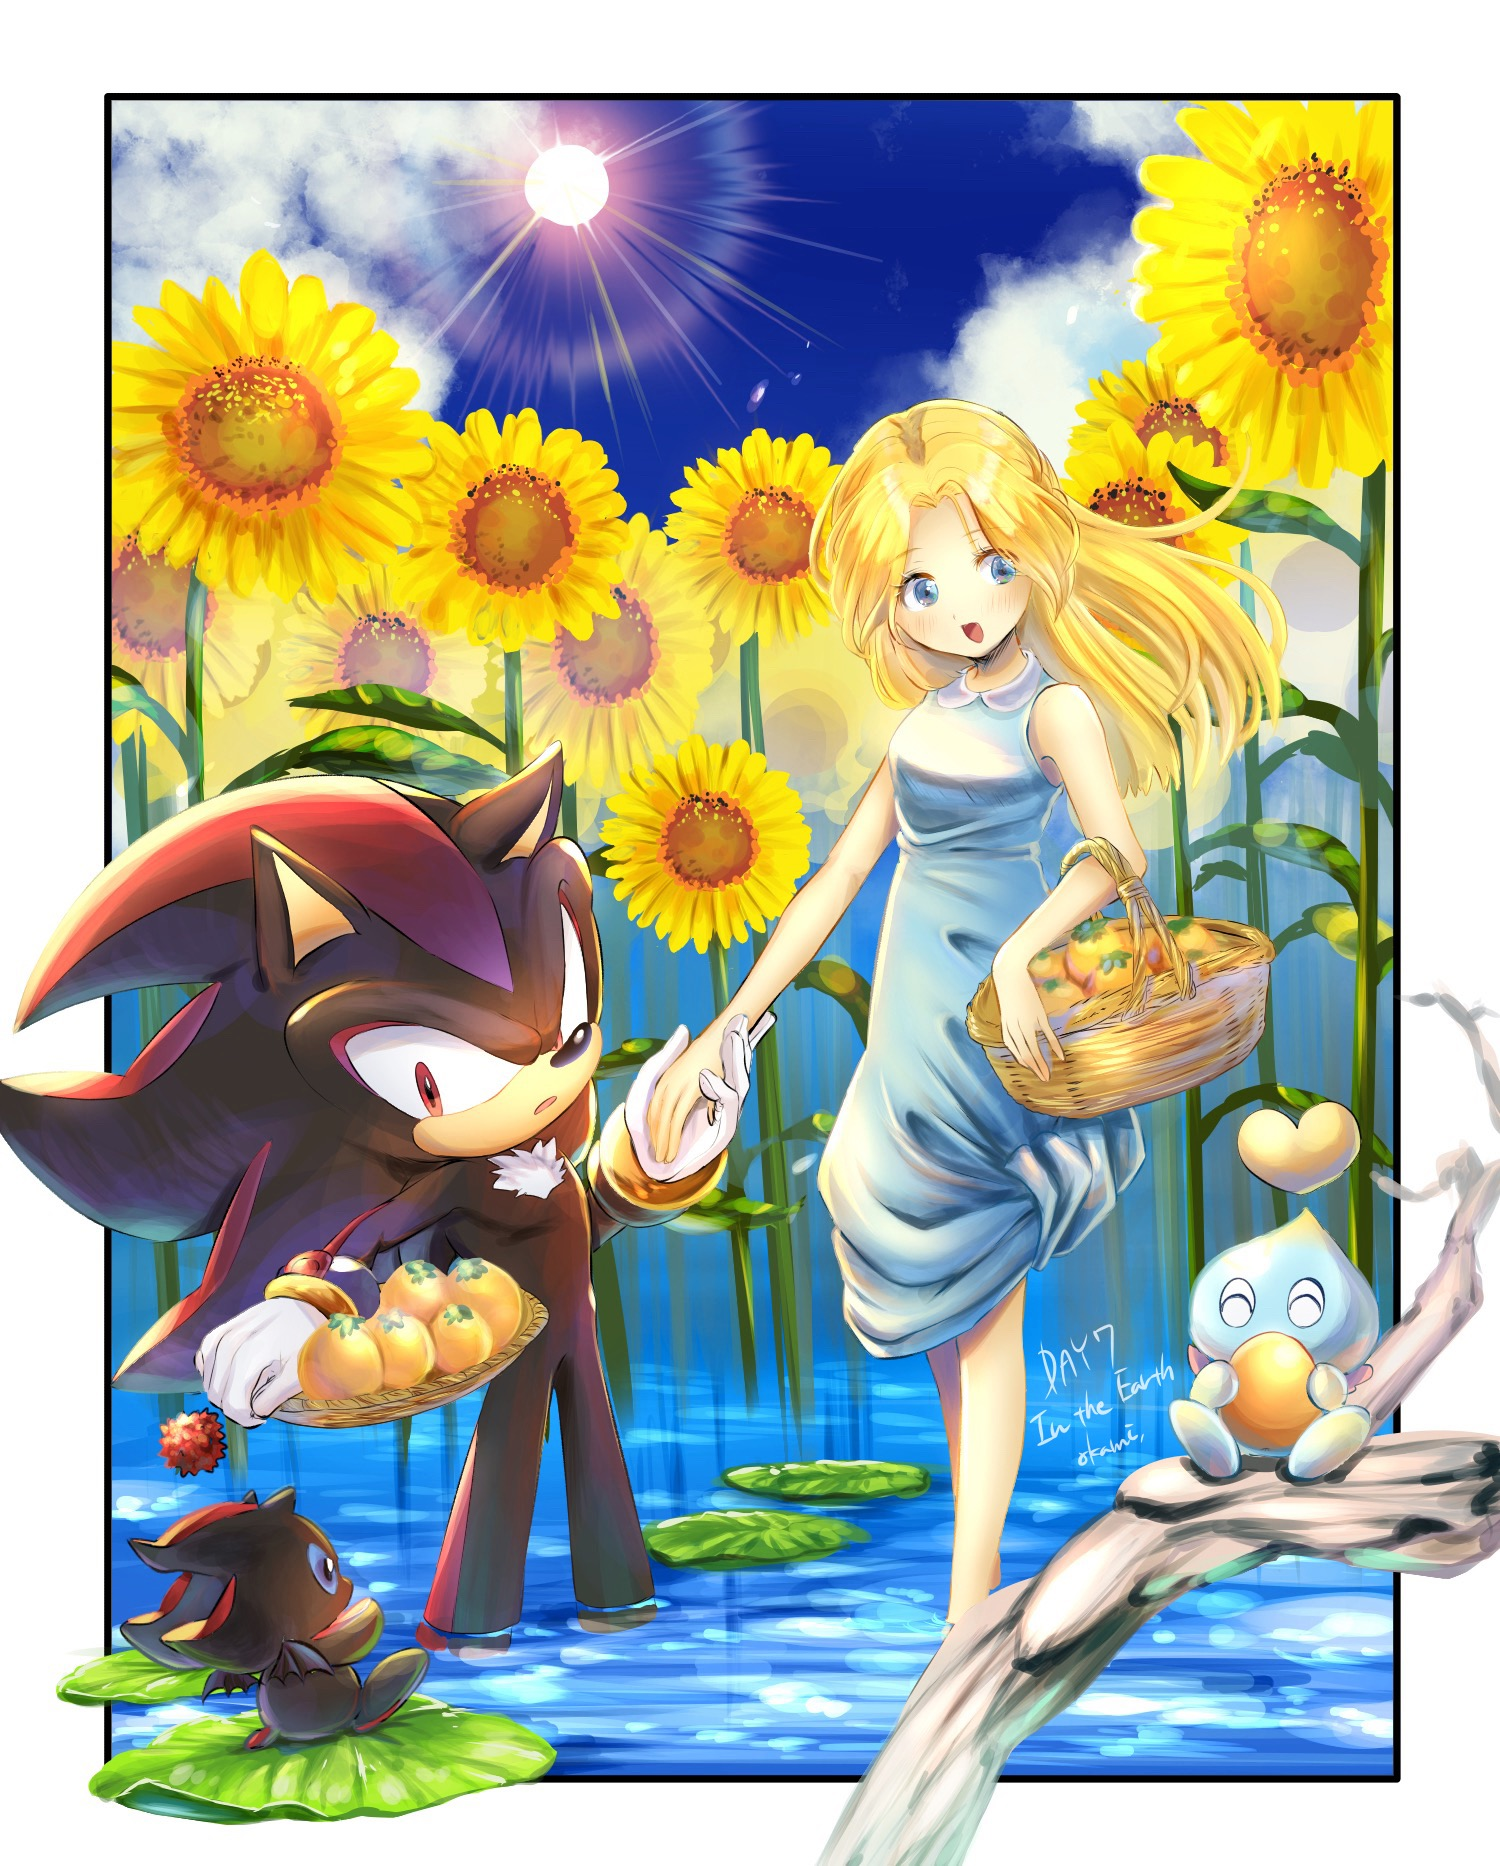 High Quality theyre in a chao garden i think (art by okami) Blank Meme Template